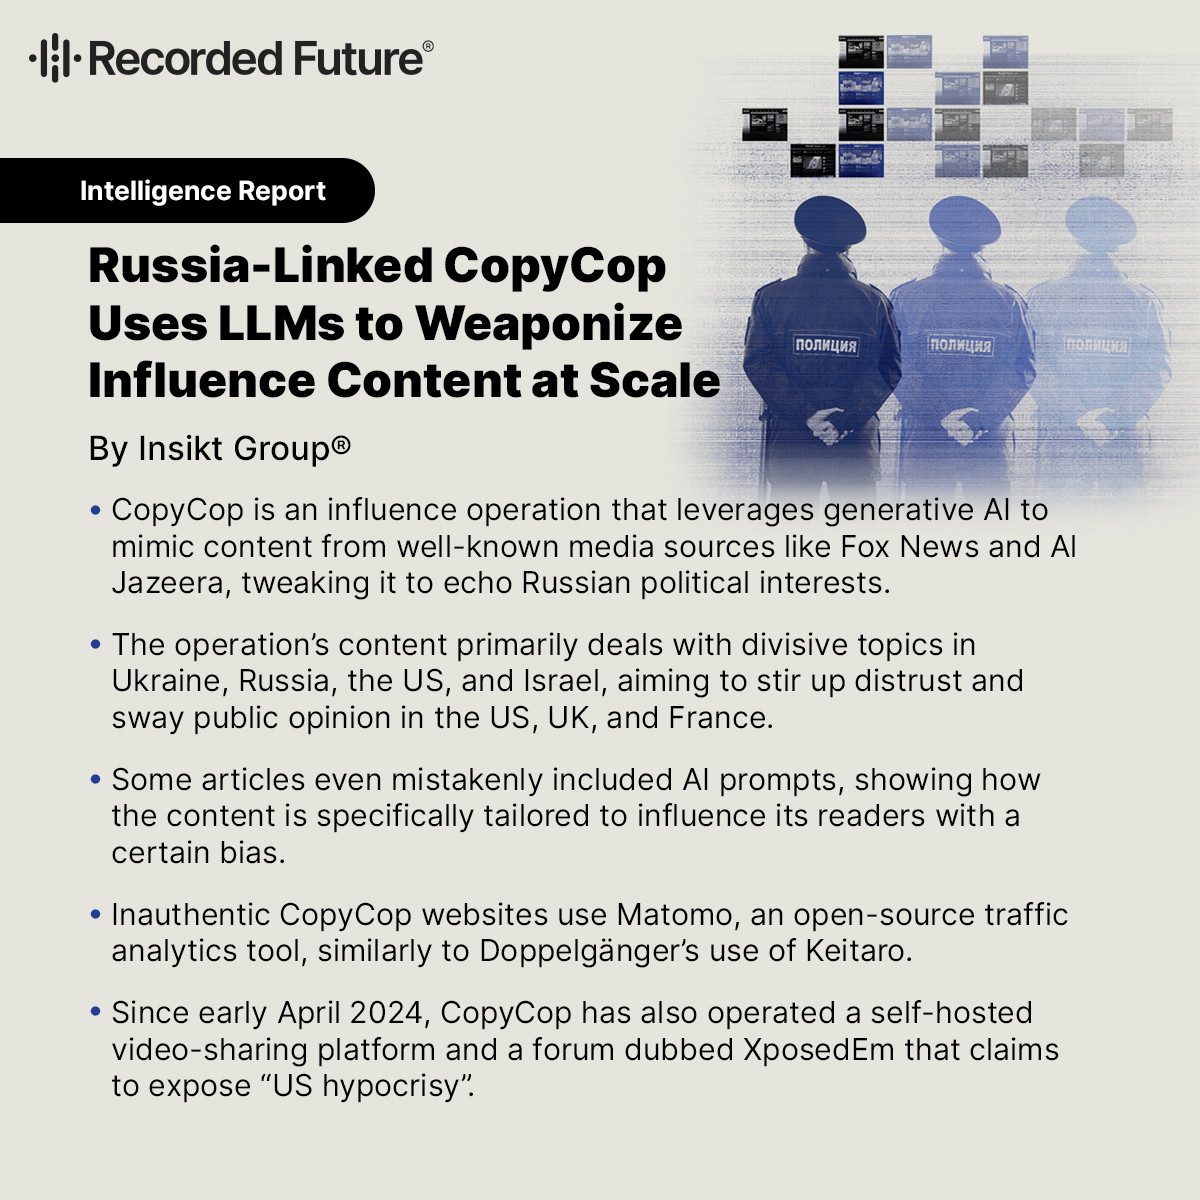 Insikt Group has identified a network named CopyCop that uses AI to manipulate content from legitimate media for political purposes.